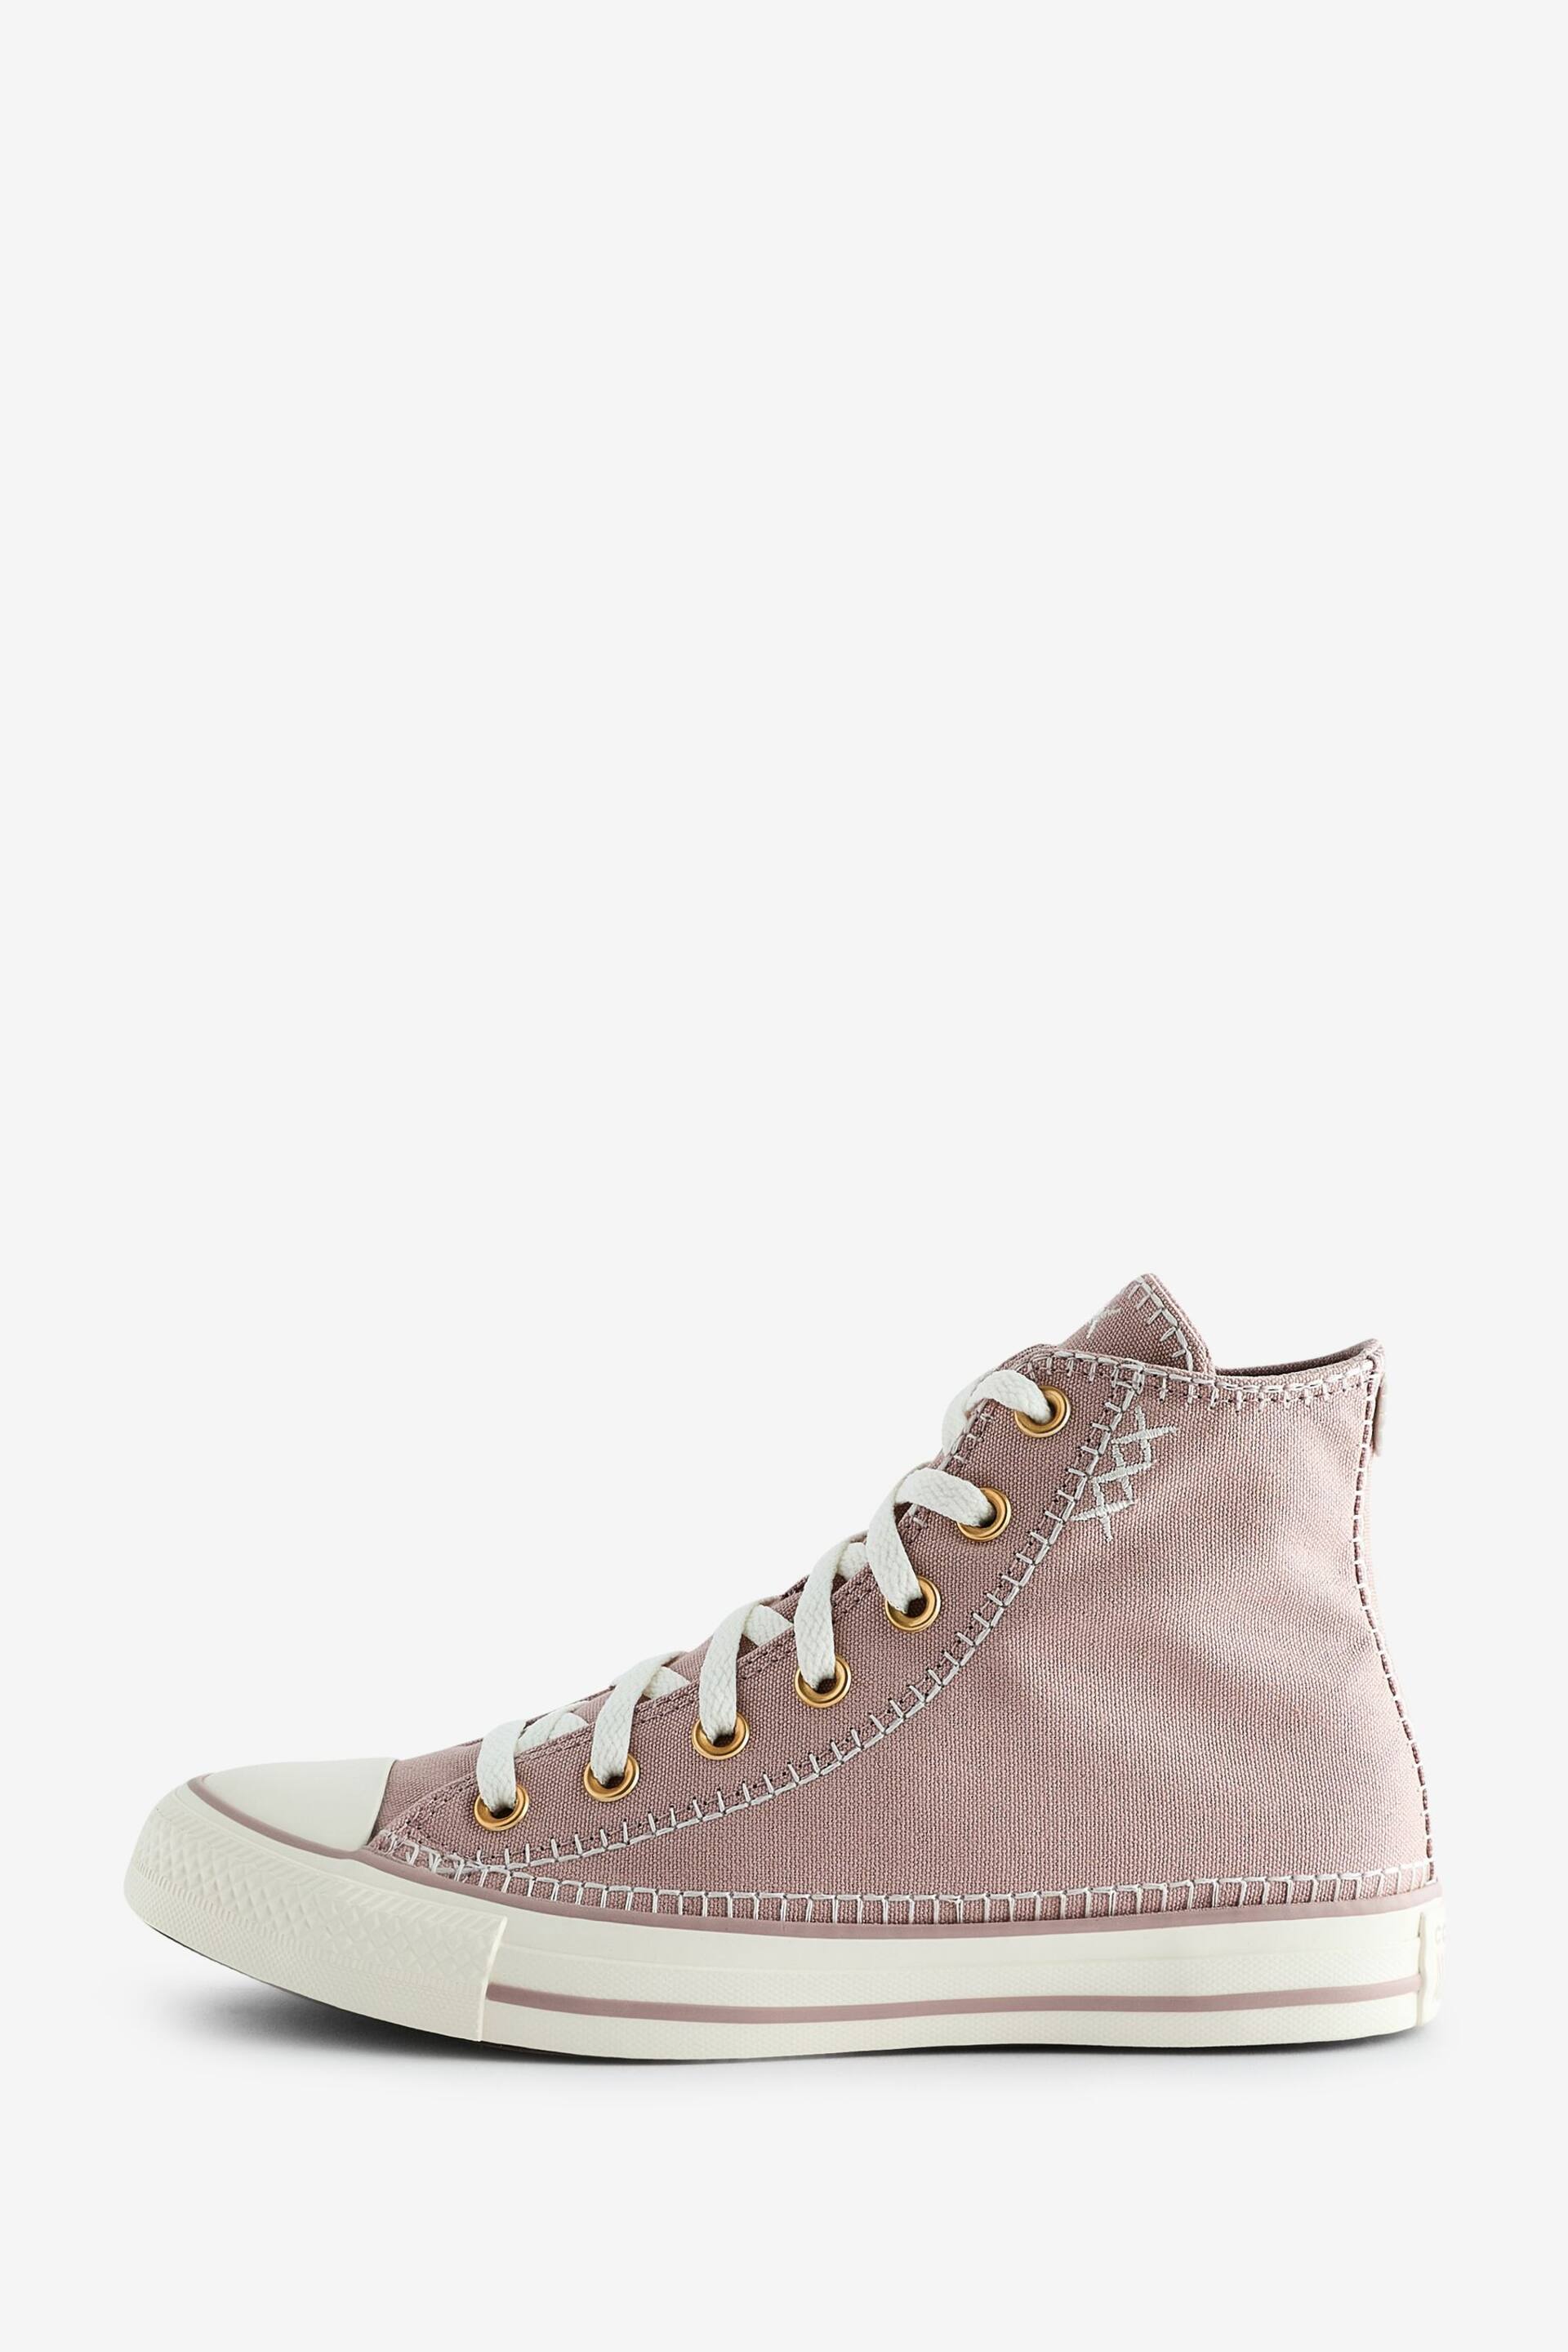 Converse Neutral Chuck Taylor All Star High Top Trainers - Image 2 of 9